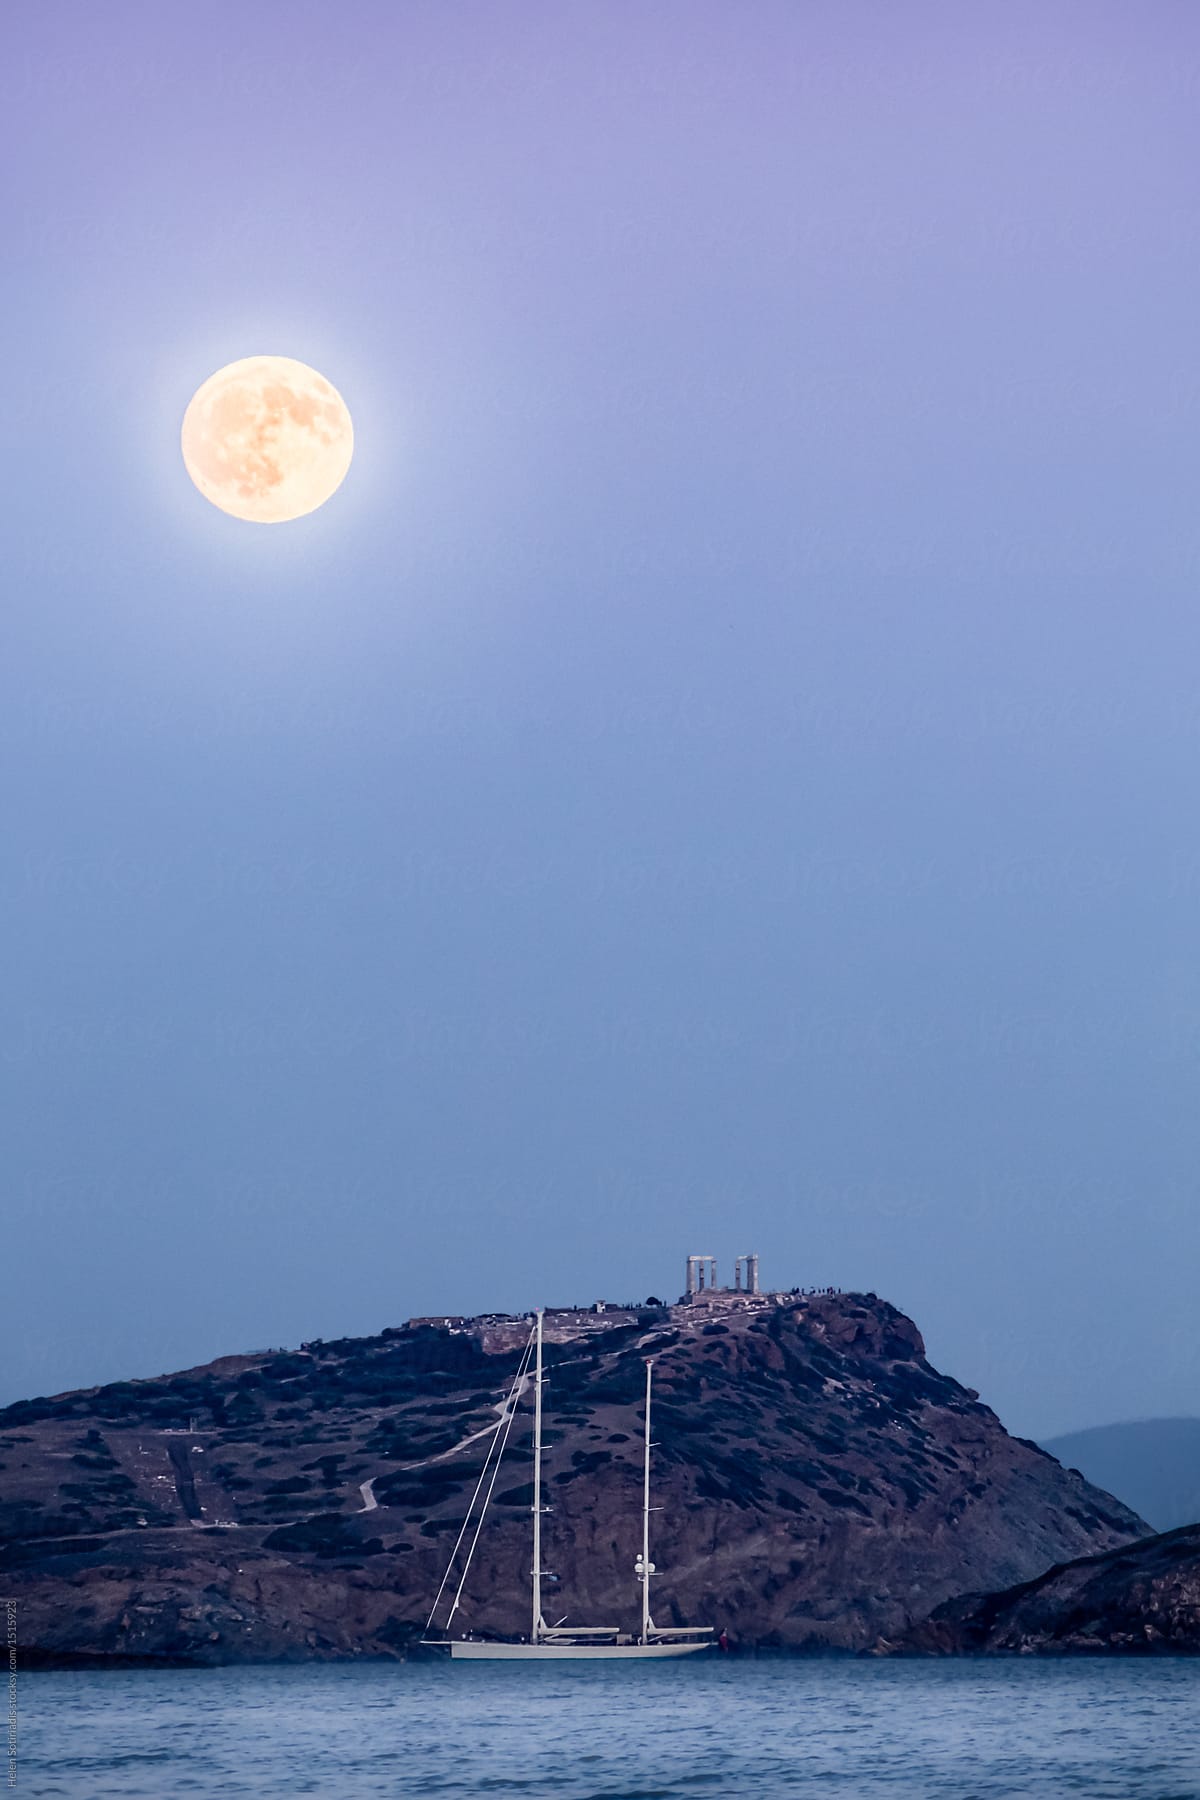 The Full Moon over Poseidon's Temple and Sailboat